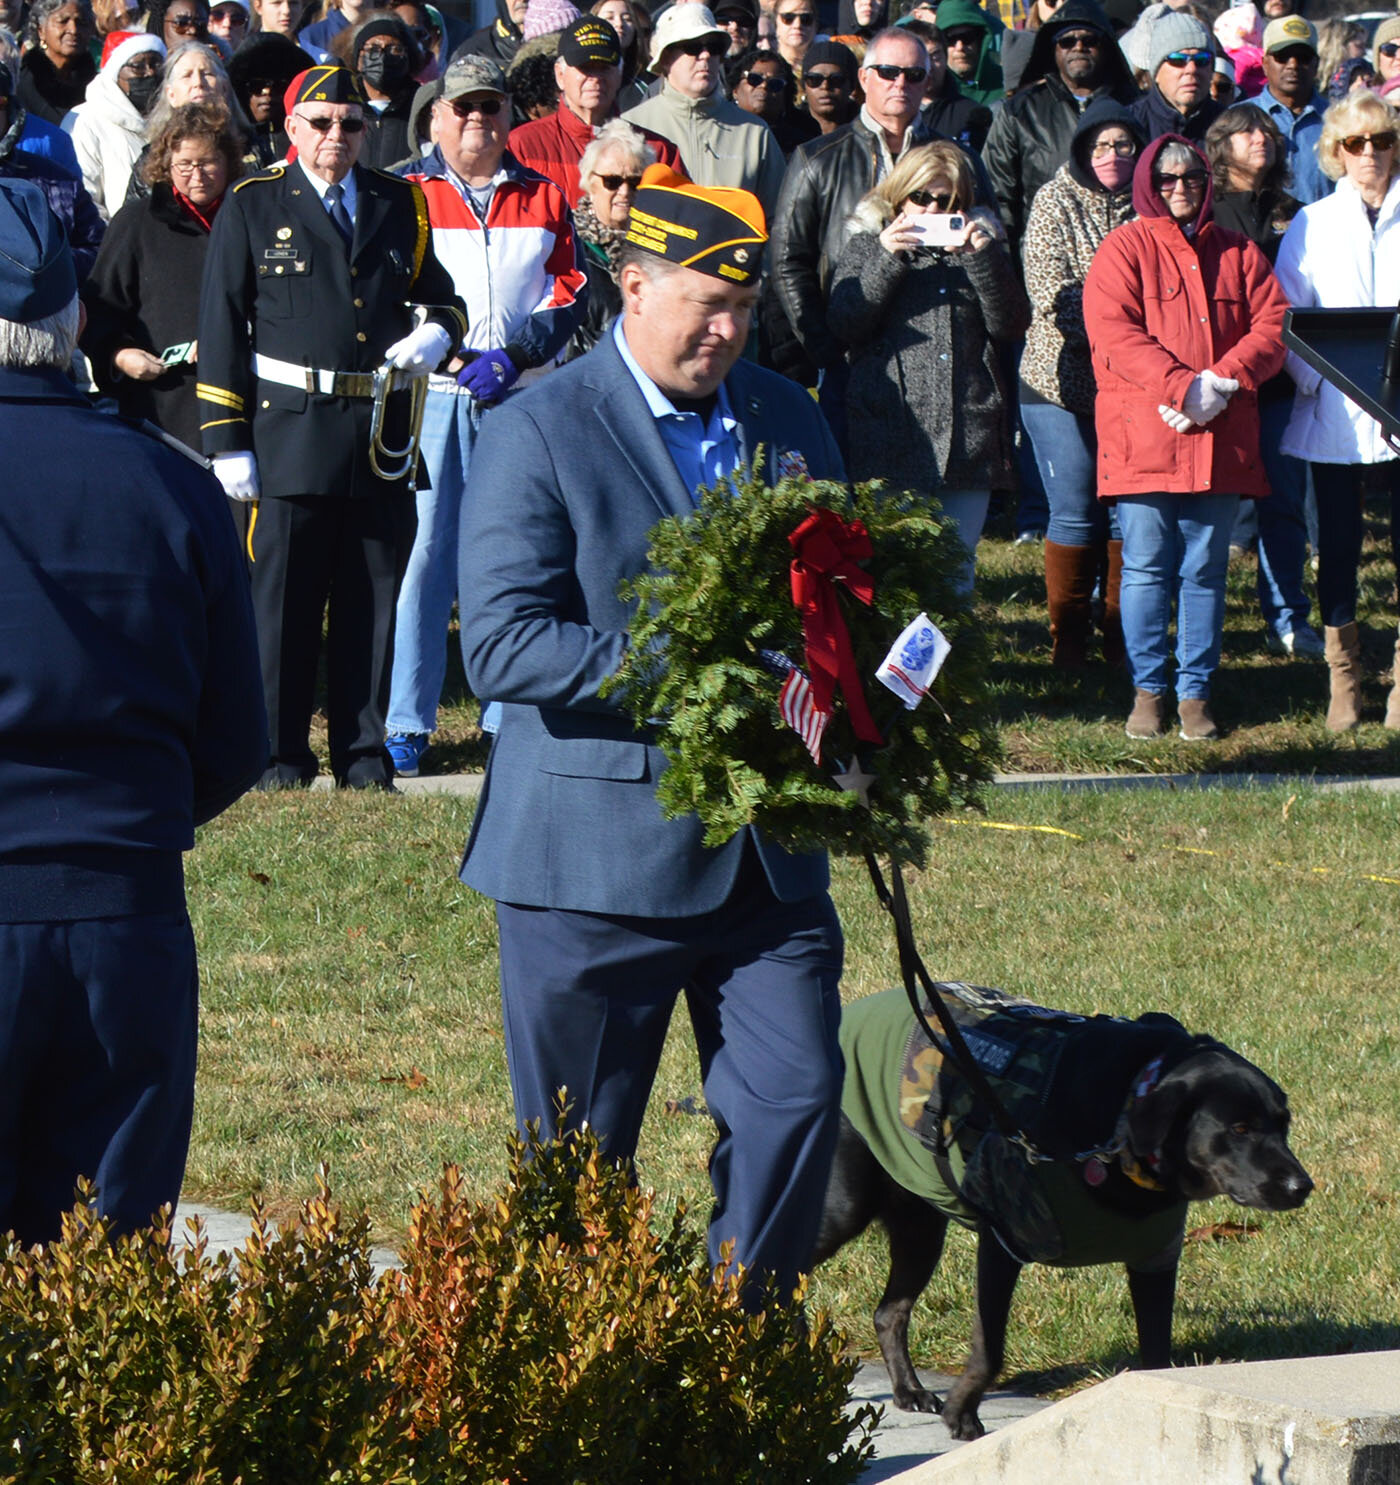 Mark Miller, a retired member of the U.S. Army, joins his service dog, Georgie, in placing a wreath during last year's Wreaths Across America ceremony at the Delaware Veterans Memorial Cemetery in Millsboro.